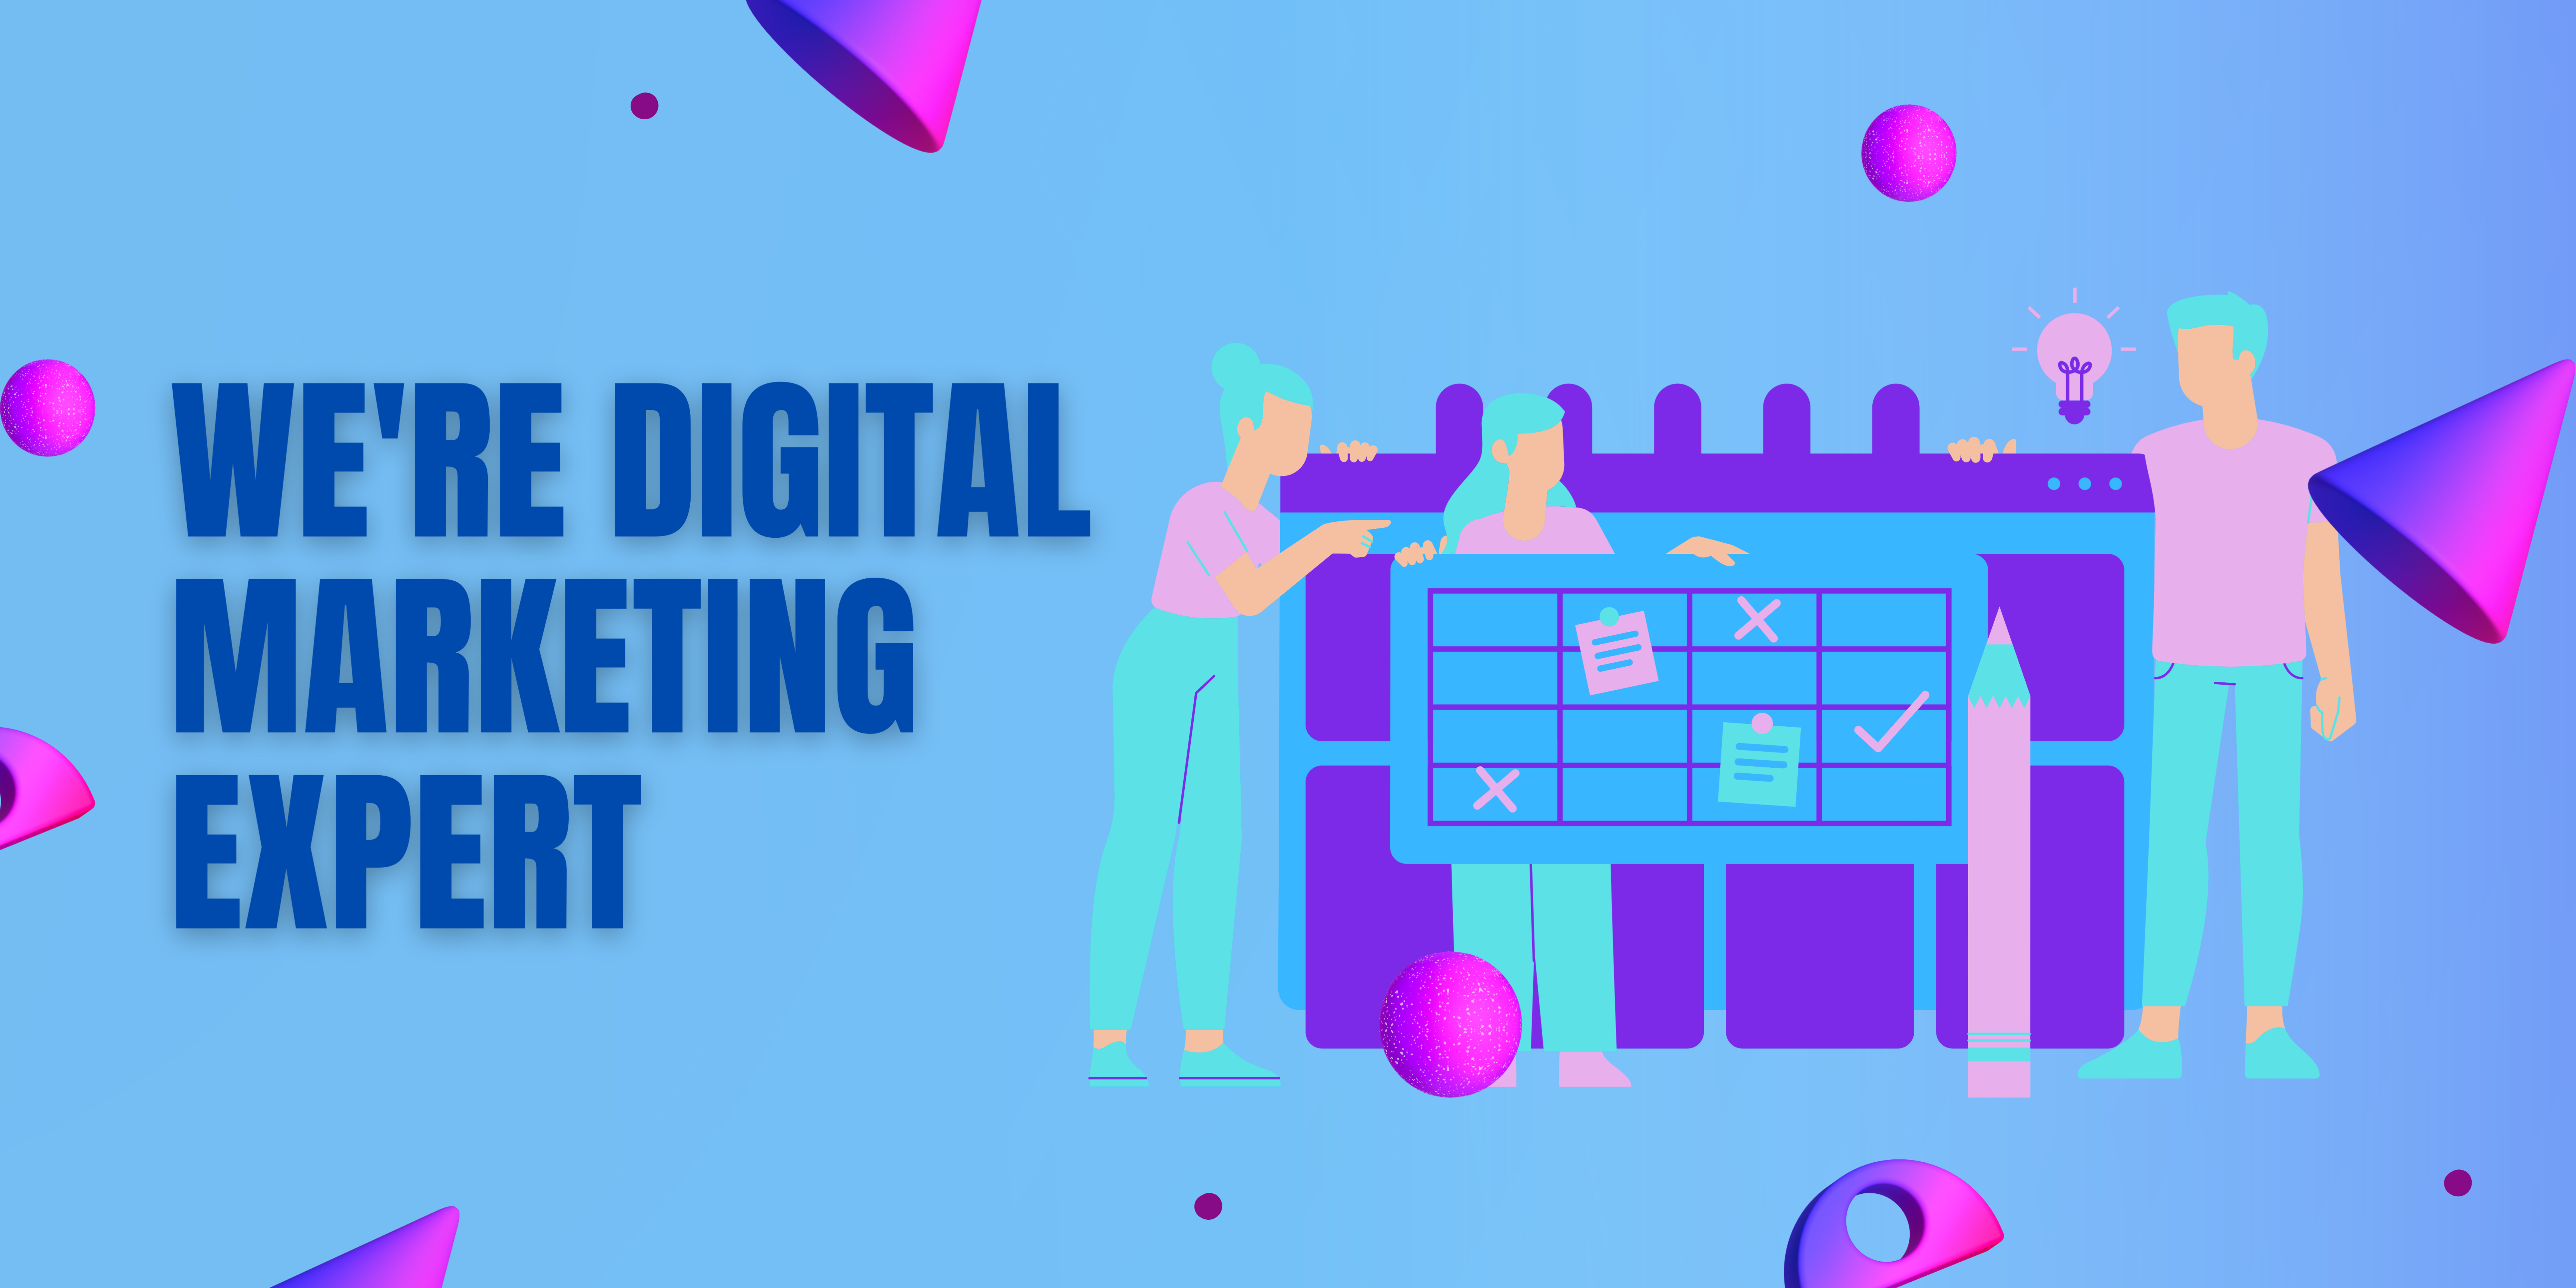 A group of digital marketing experts smiling and looking at the camera, standing around a calendar with the words "We're Digital Marketing Expert" written on it